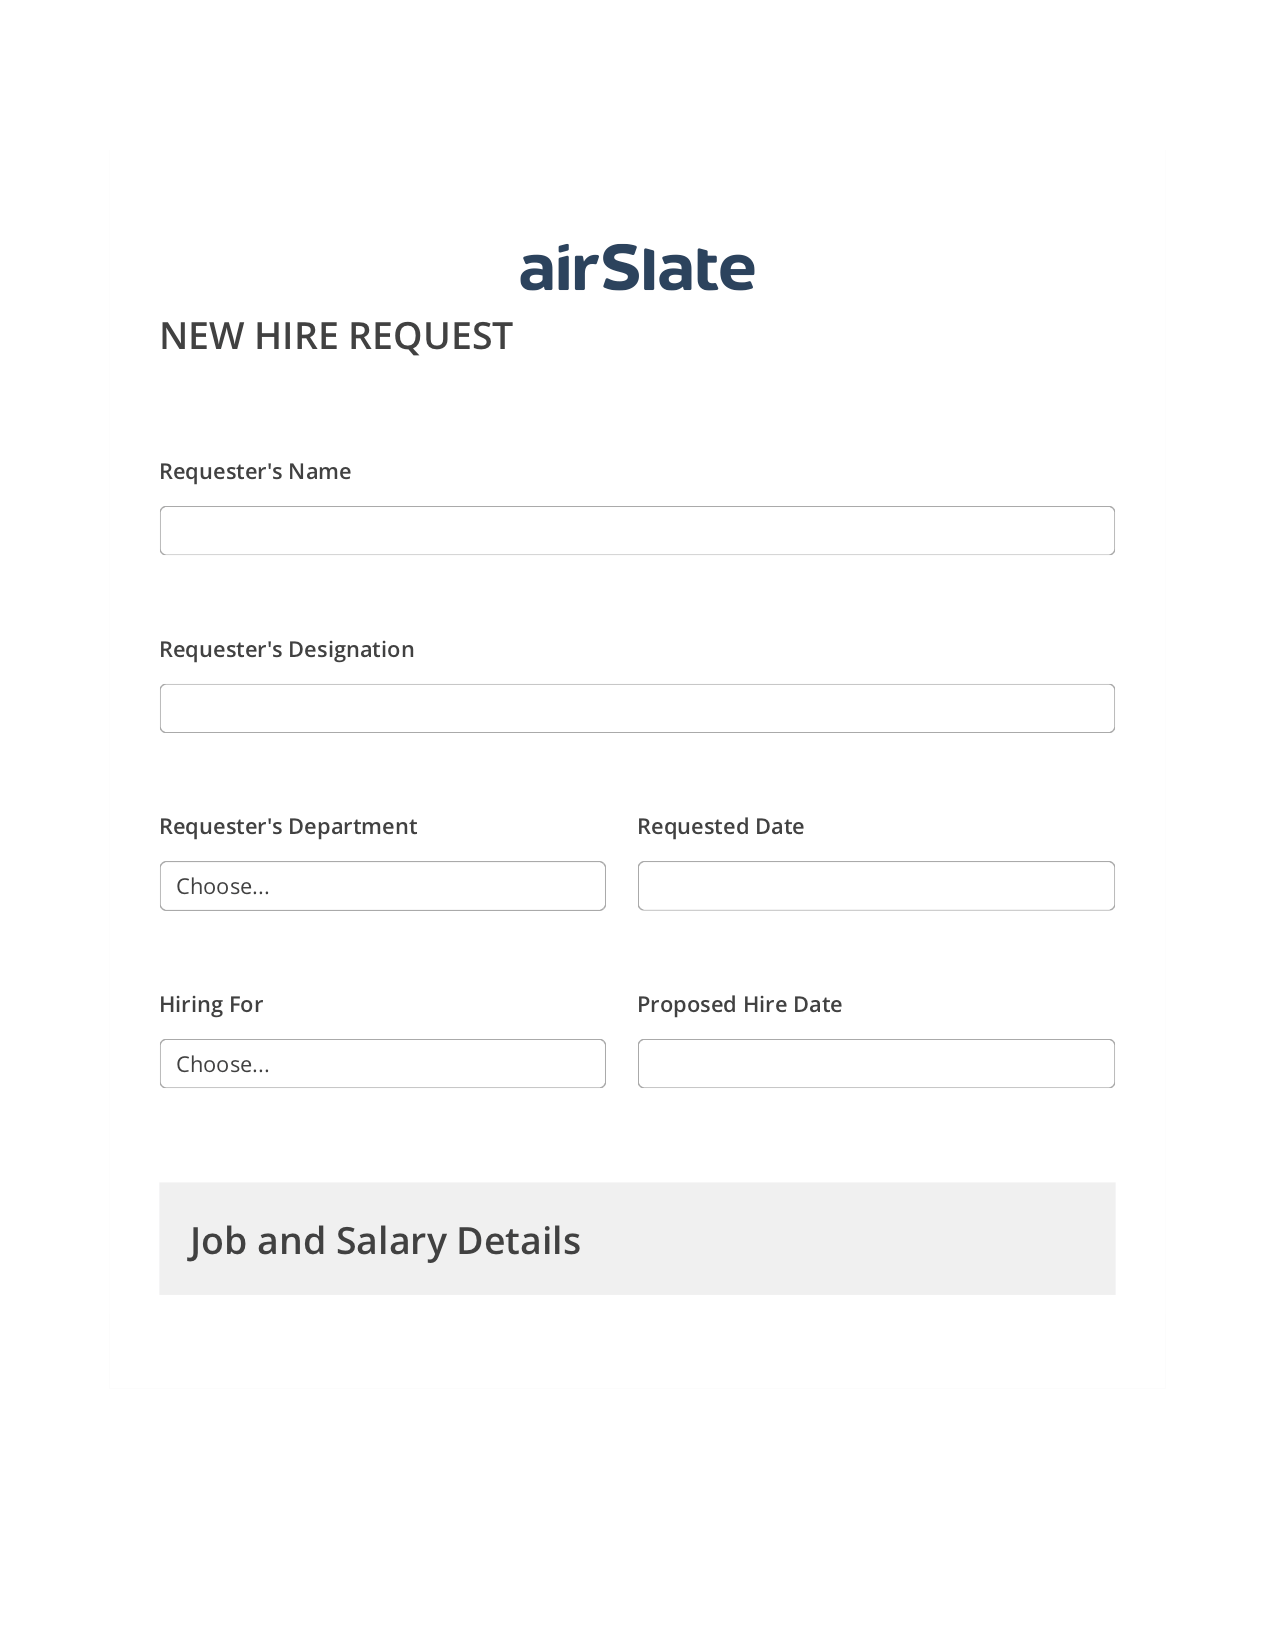 Multirole Hiring Request Workflow Pre-fill from Salesforce Records Bot, Create slate bot, Archive to SharePoint Folder Bot